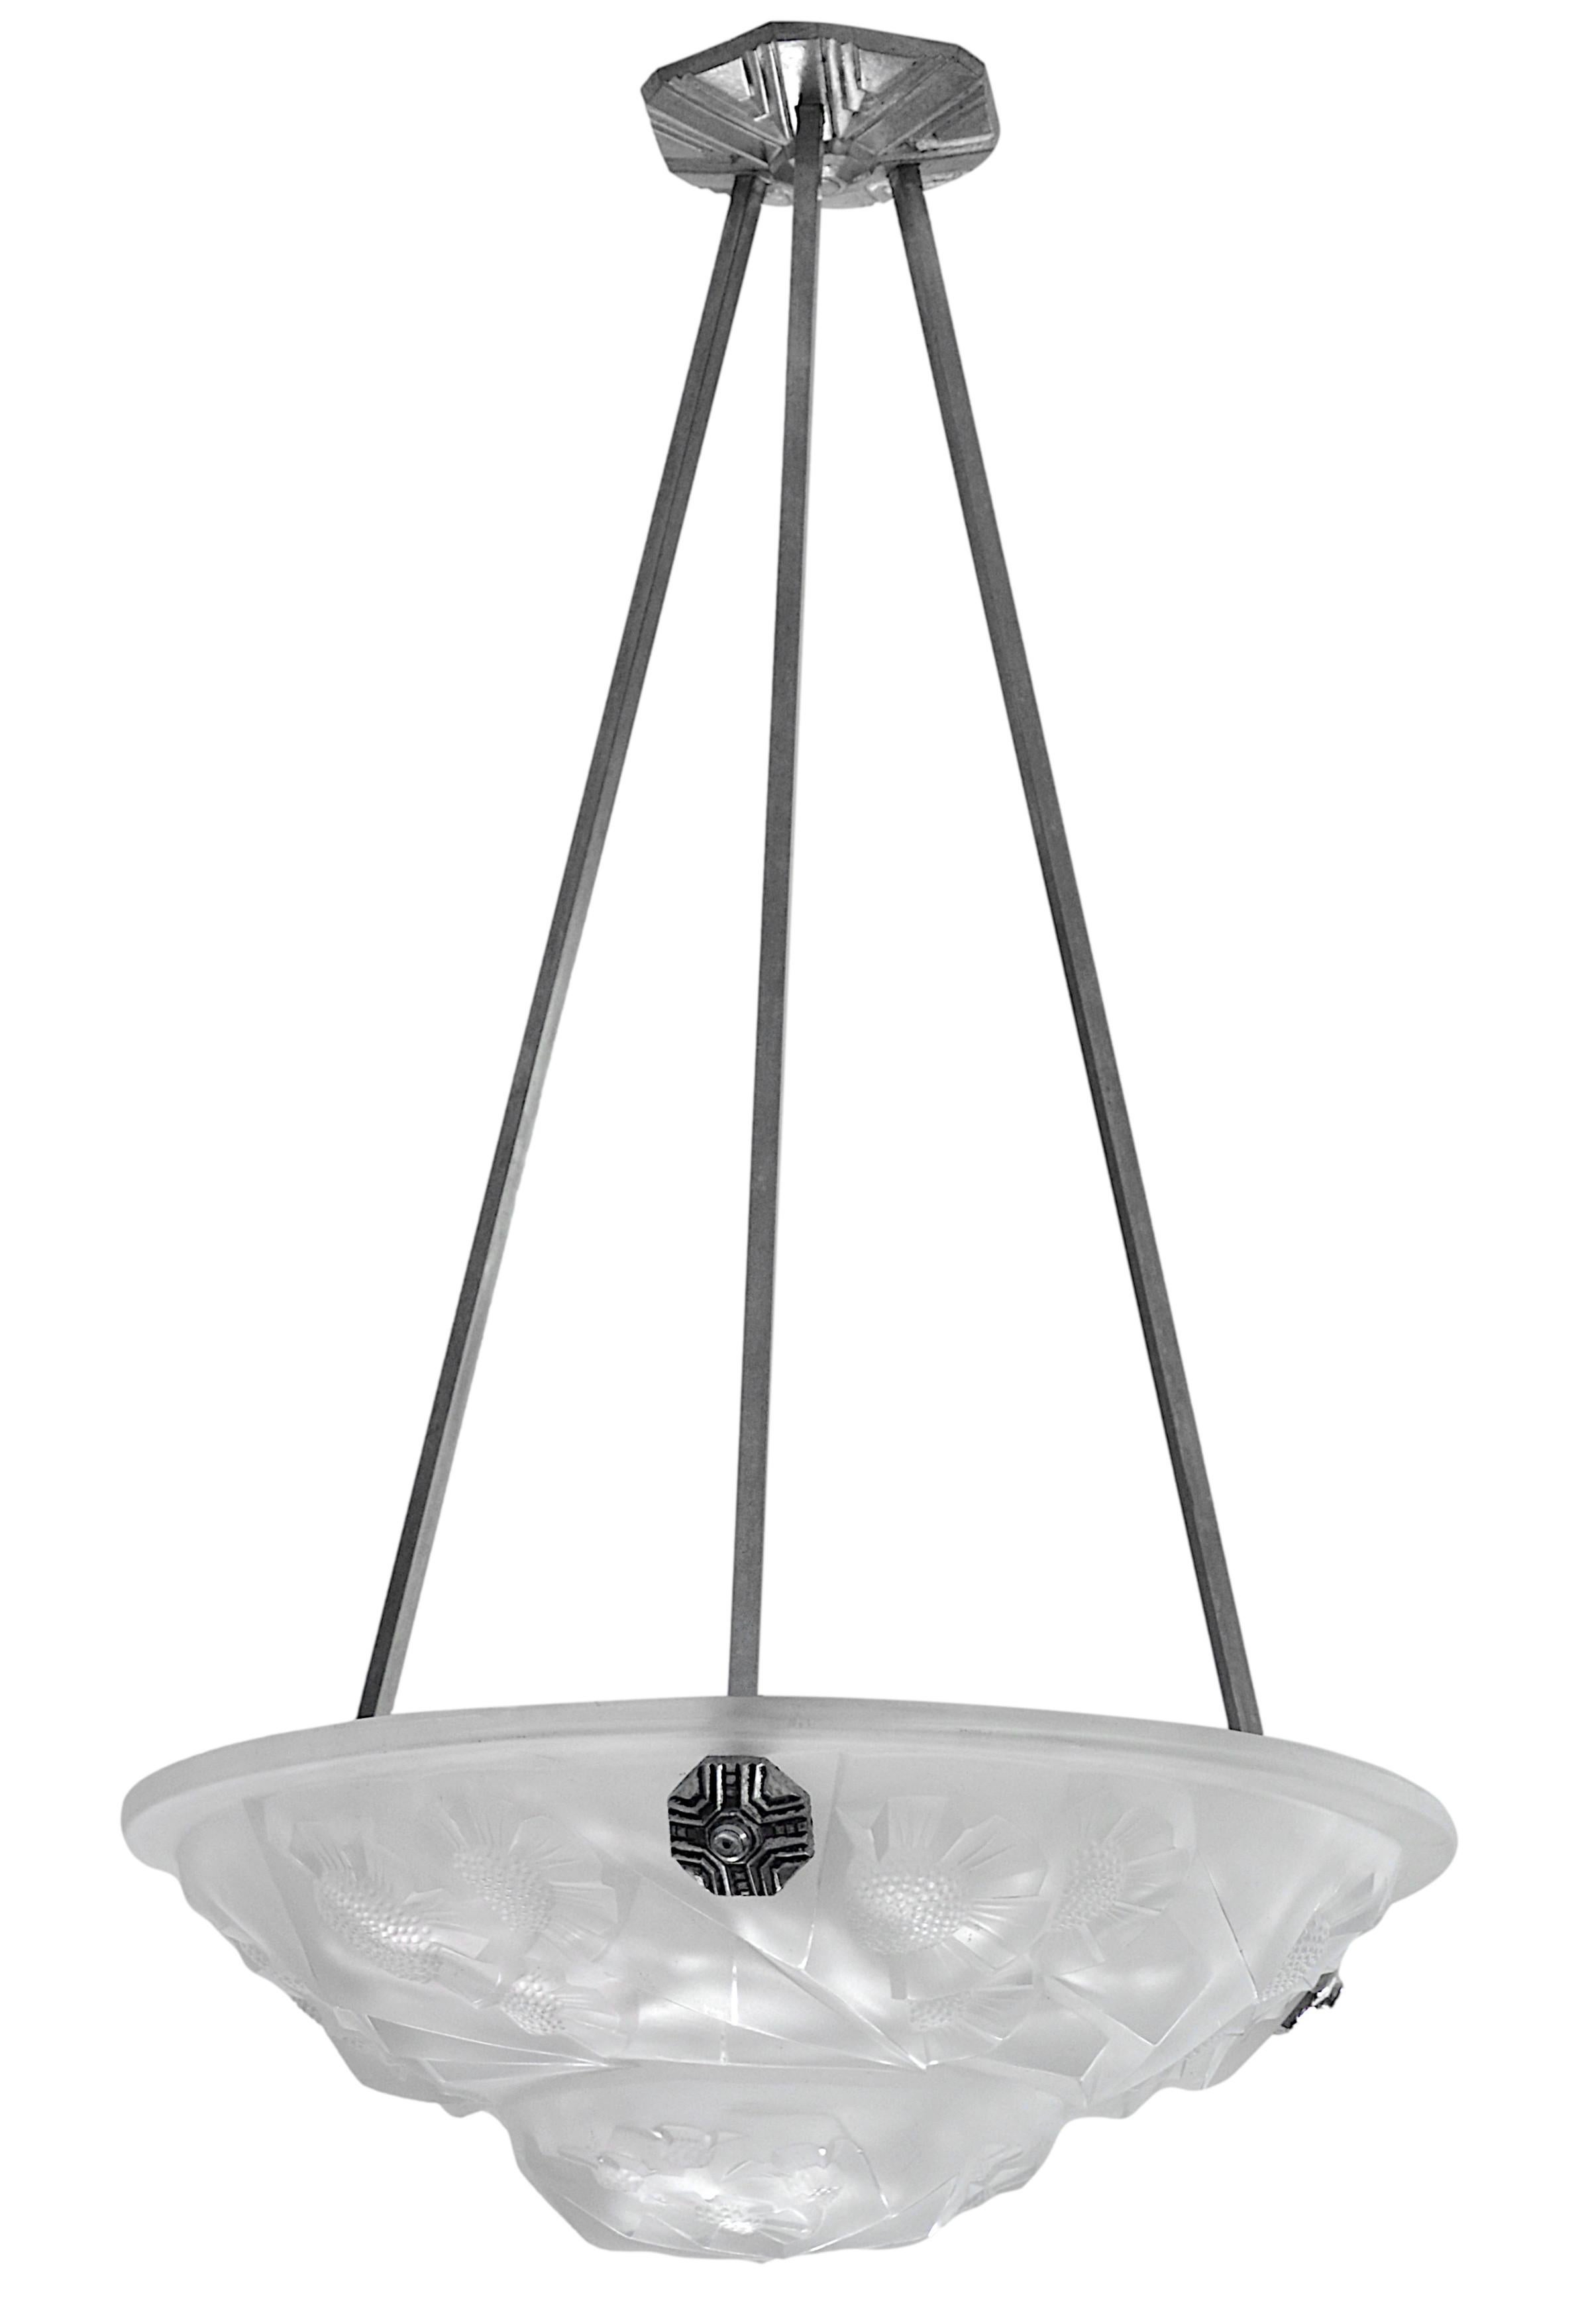 Large French Art Deco pendant chandelier by DEGUE (Compiegne) for Francis HUBENS, 68 rue des Archives, Paris, France, ca. 1930. White thick frosted glass shade with an Art Deco stylized floral pattern. Bronze frame. Measures: height: 27.2